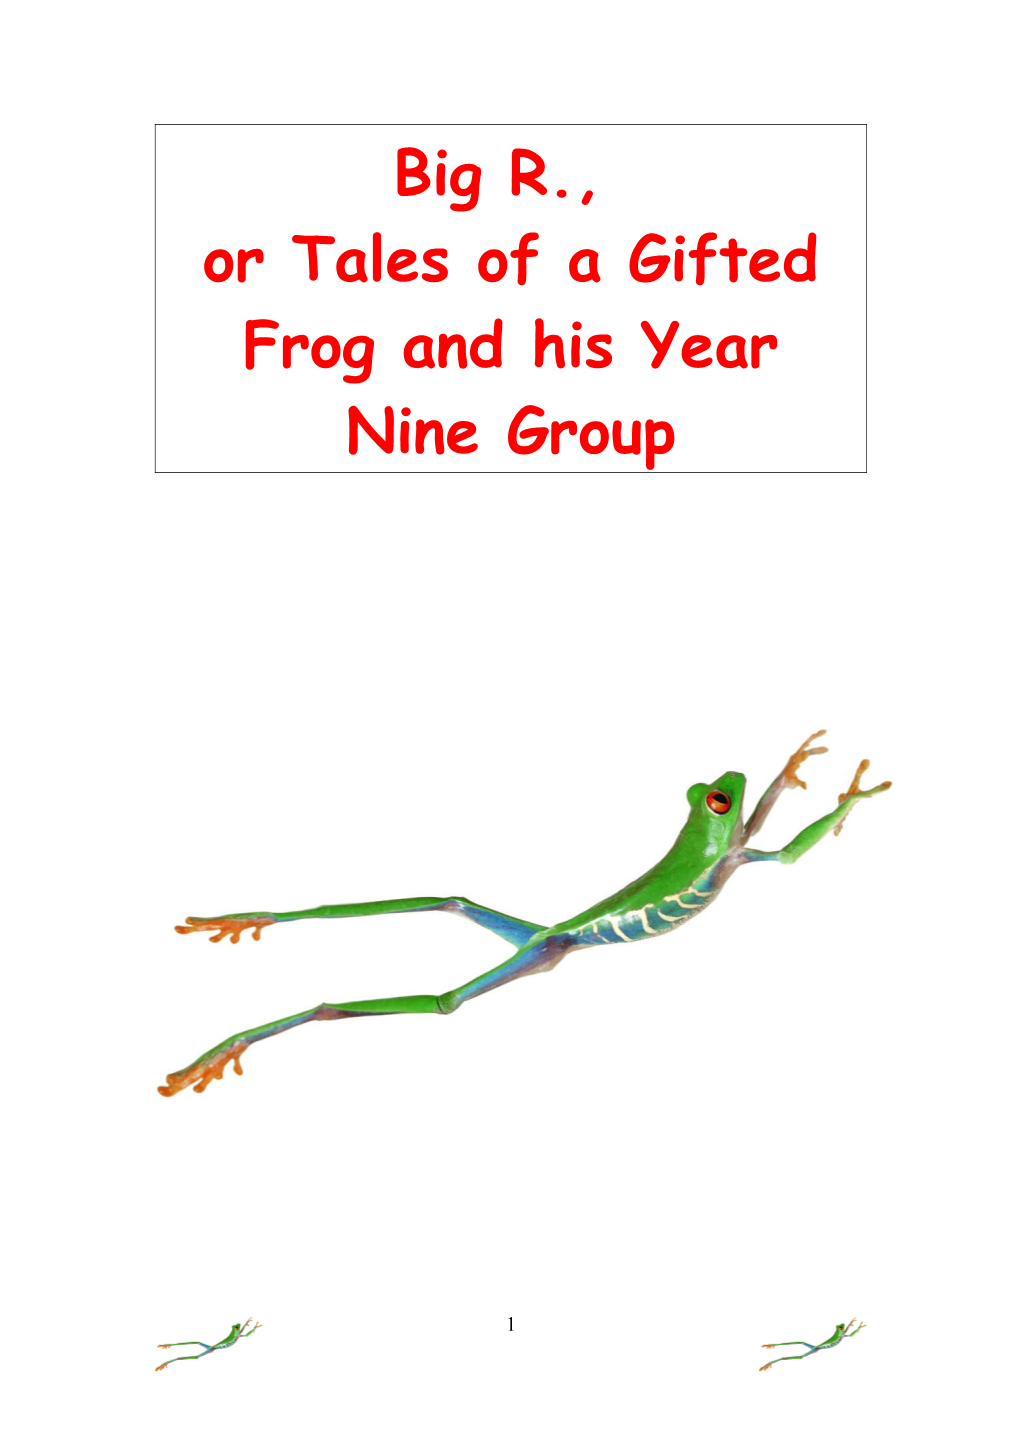 Or Tales of a Gifted Frog and His Year Nine Group